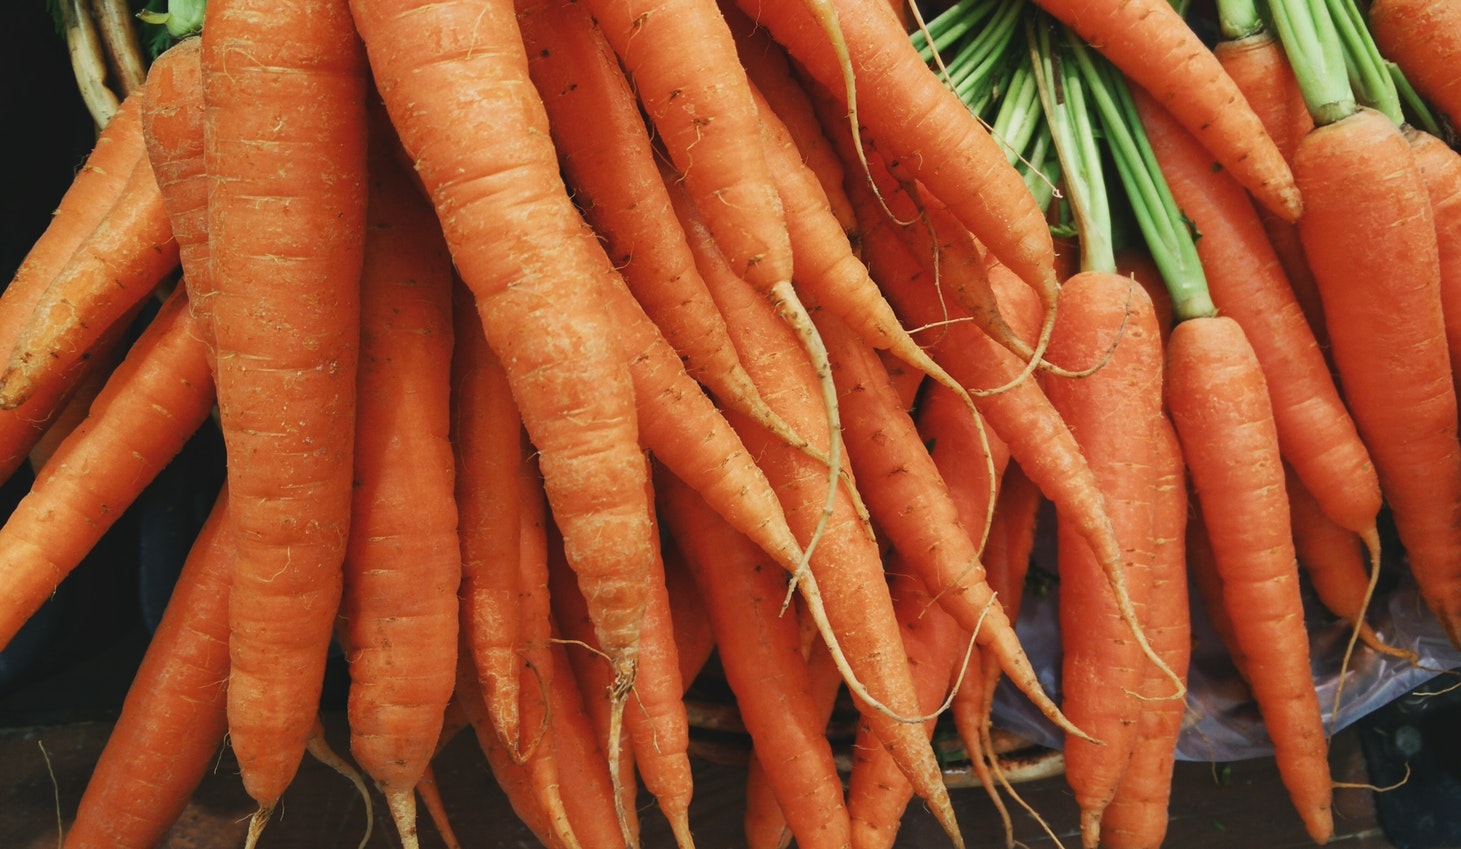 Curing Cancer with Carrots - bunch of carrots - Pic